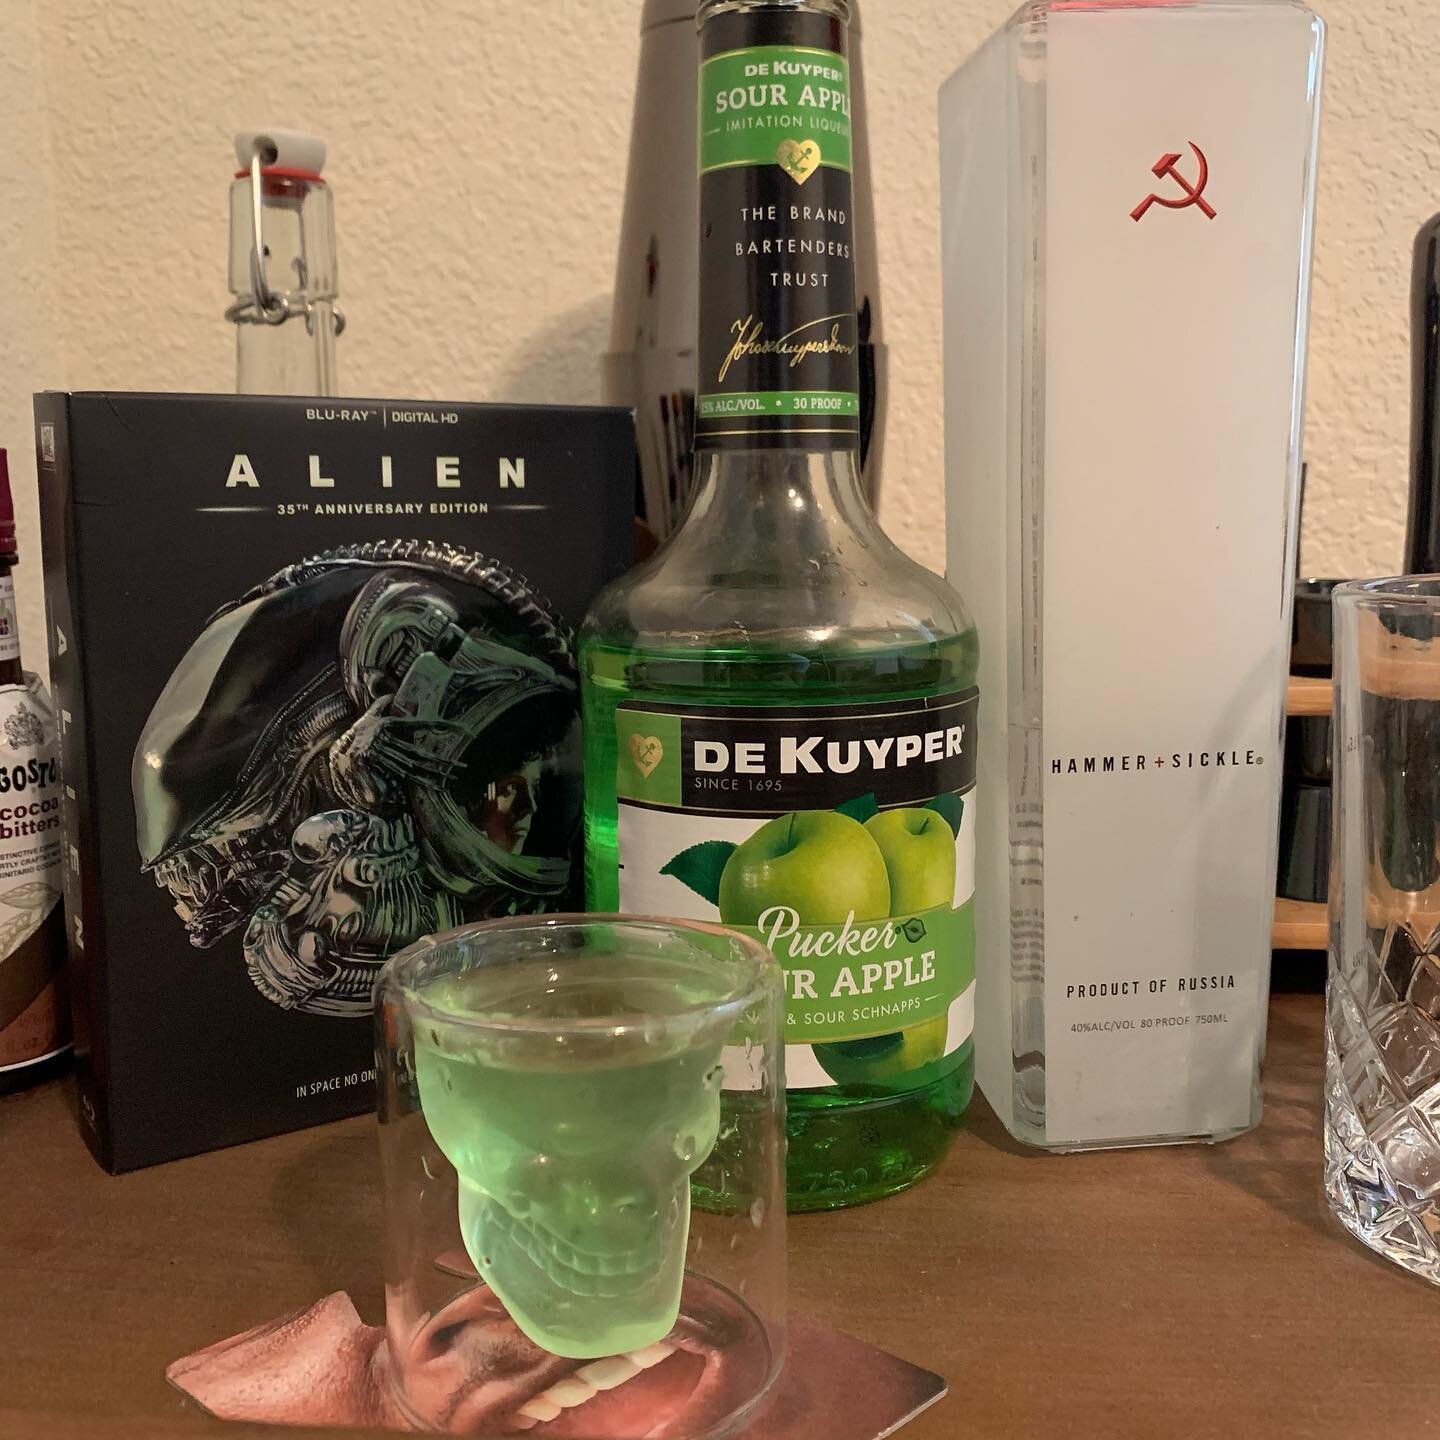 This one goes out to @ellestdee who&rsquo;s favorite horror movie is Alien👽

Alien and a Face Hugger Shot
&bull;1oz Vodka
&bull;1.5 oz Green Apple Schnapps
&bull;Splash of simple syrup

Send us your spooky movies for featured drink pairings!